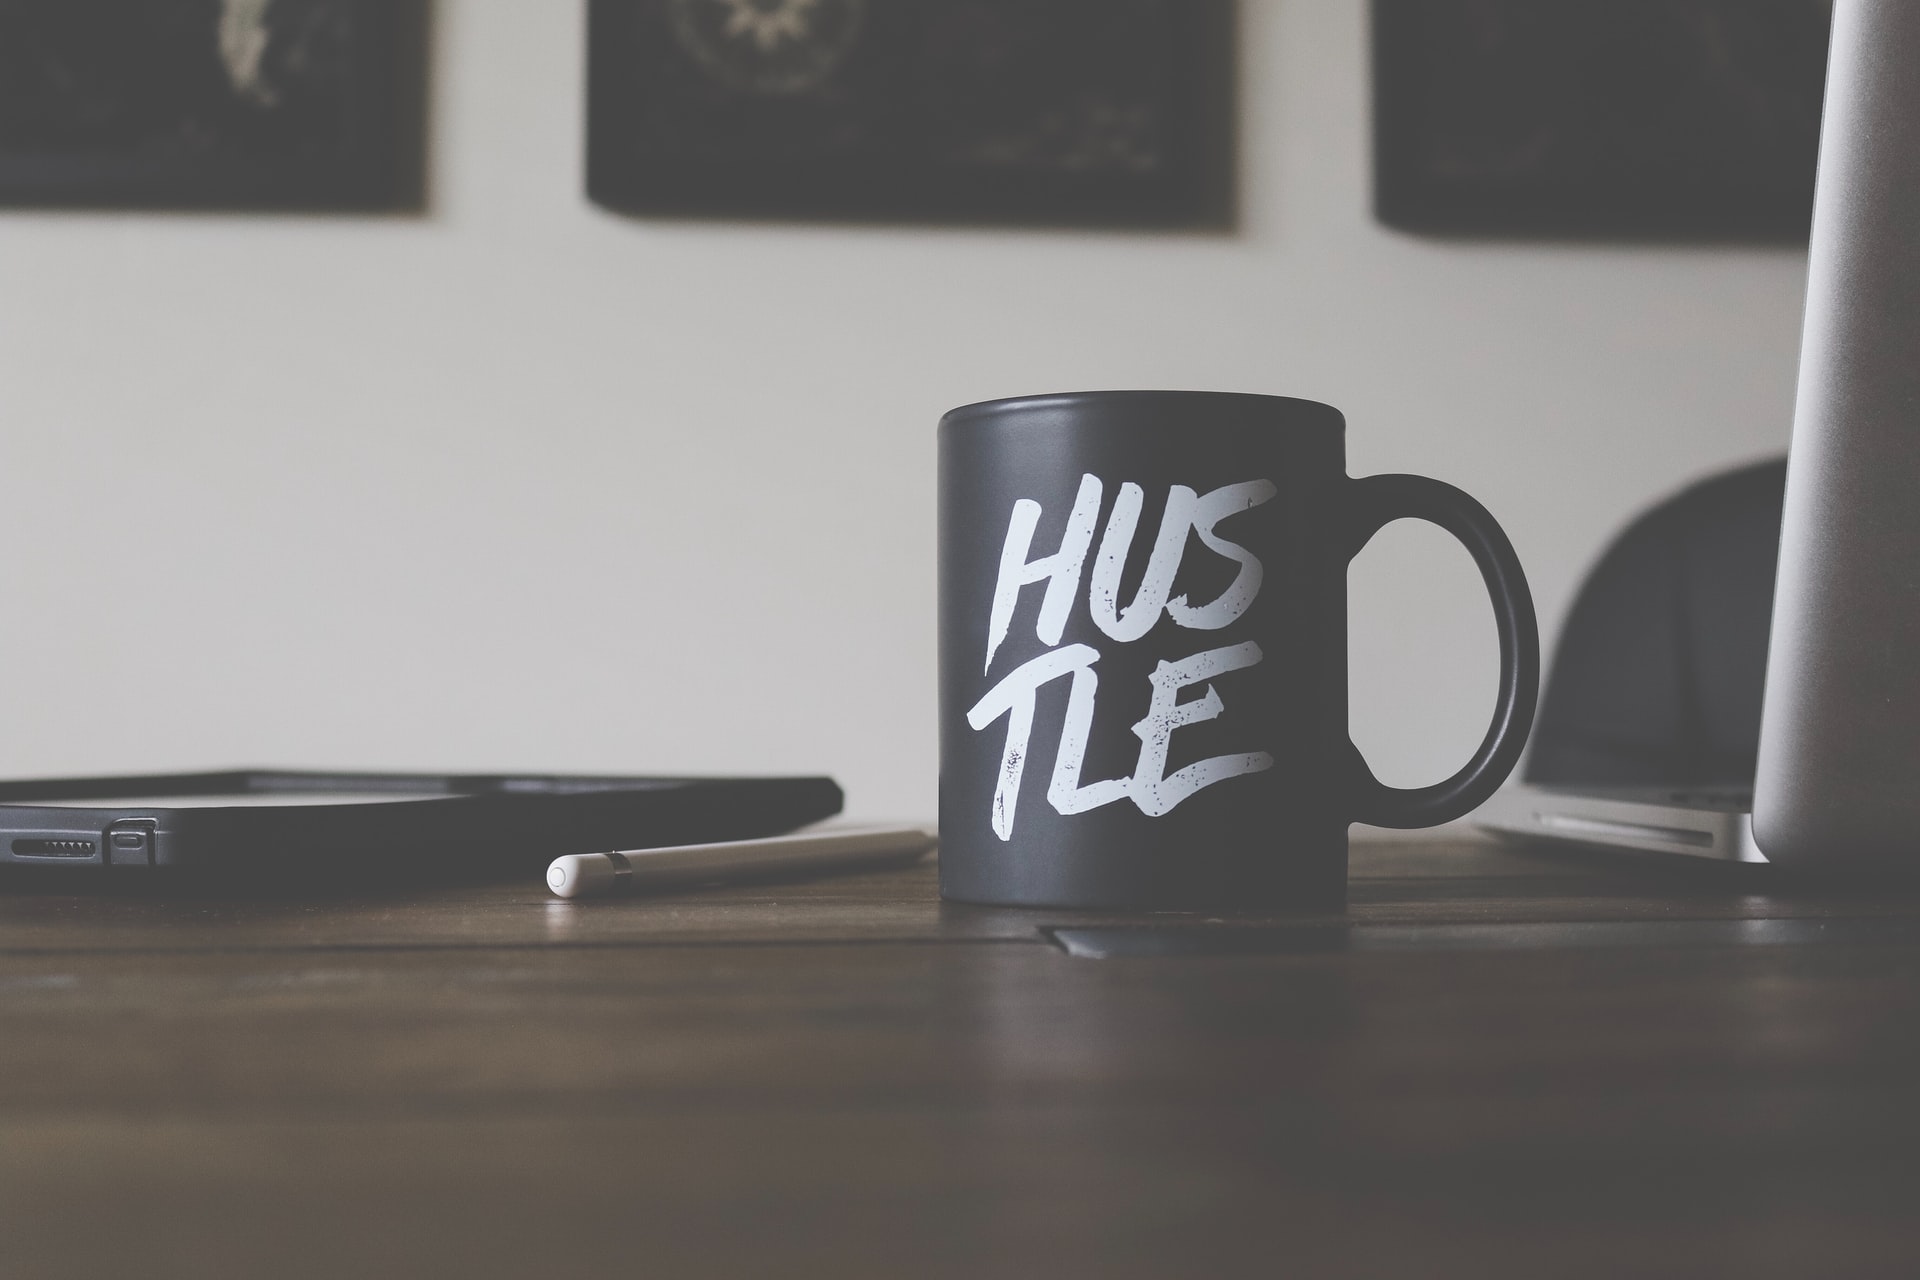 a black coffee mug on an office desk with the word "hustle" on it, representing entrepreneurship